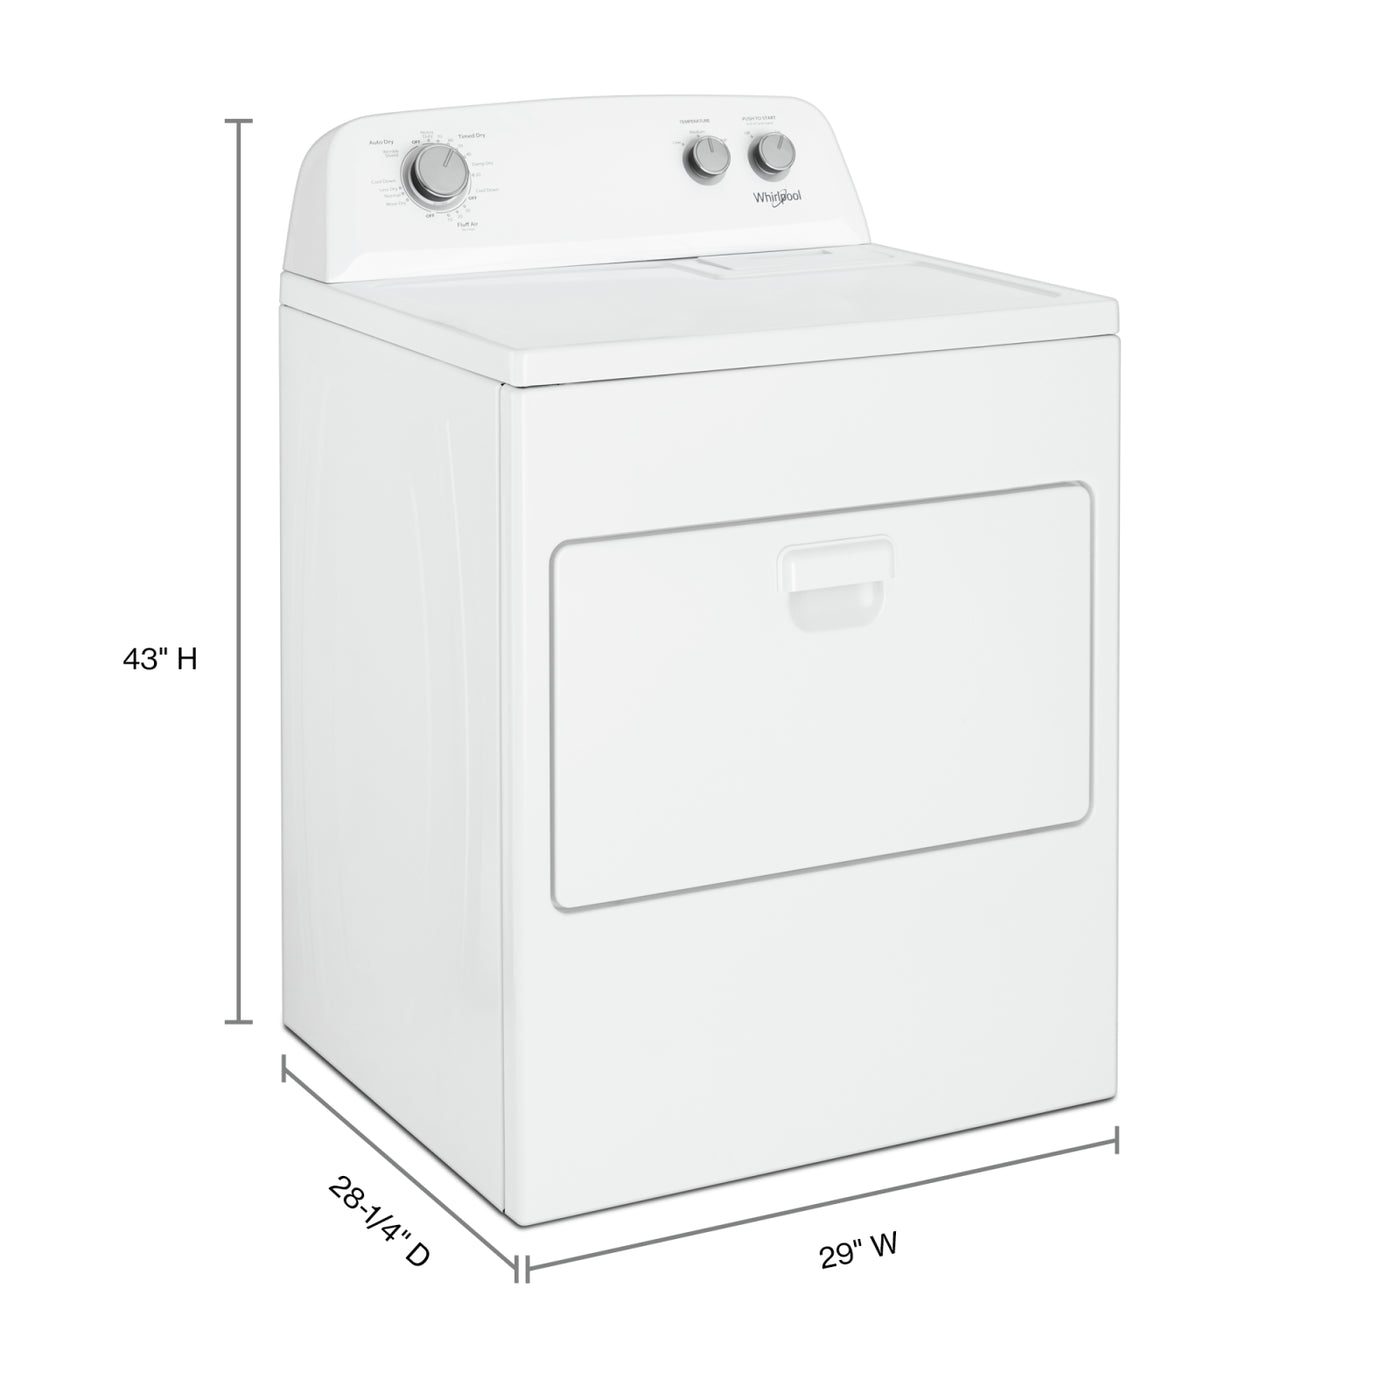 Whirlpool White Electric Dryer (7.0 Cu. Ft.) - YWED4850HW